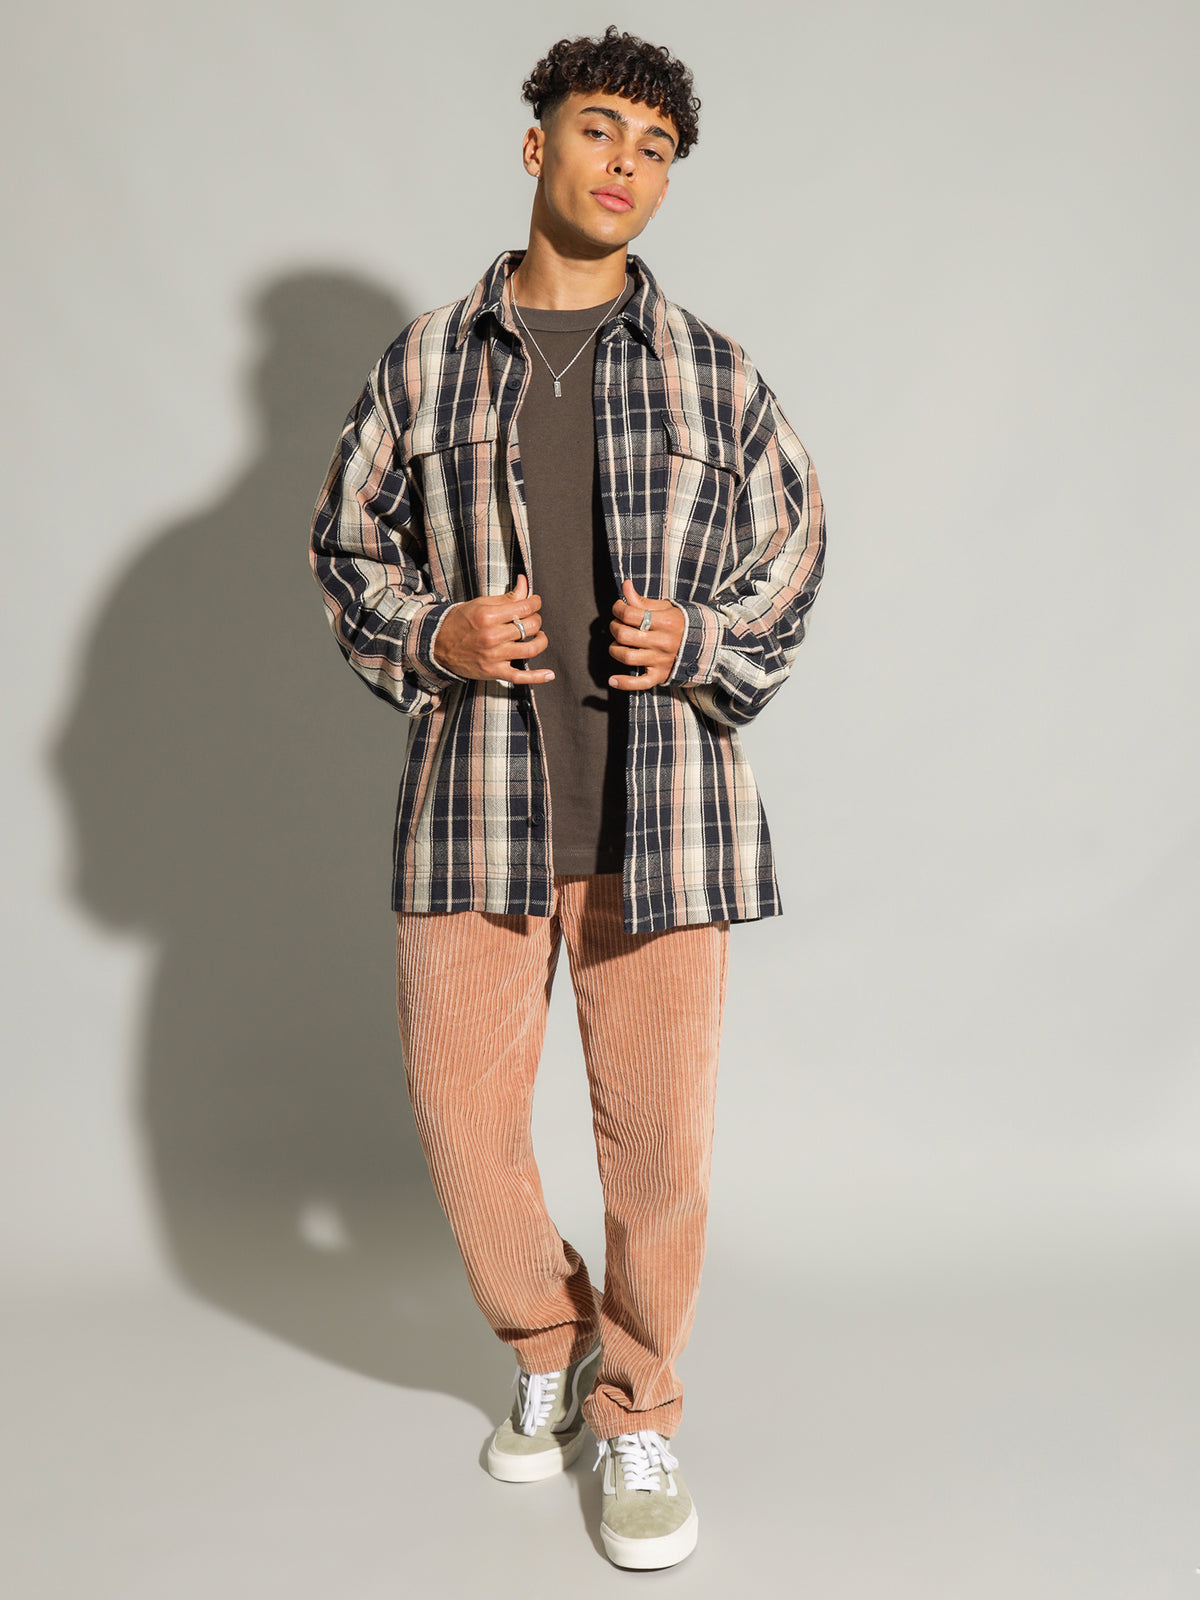 Collusion Overshirt in Navy Plaid